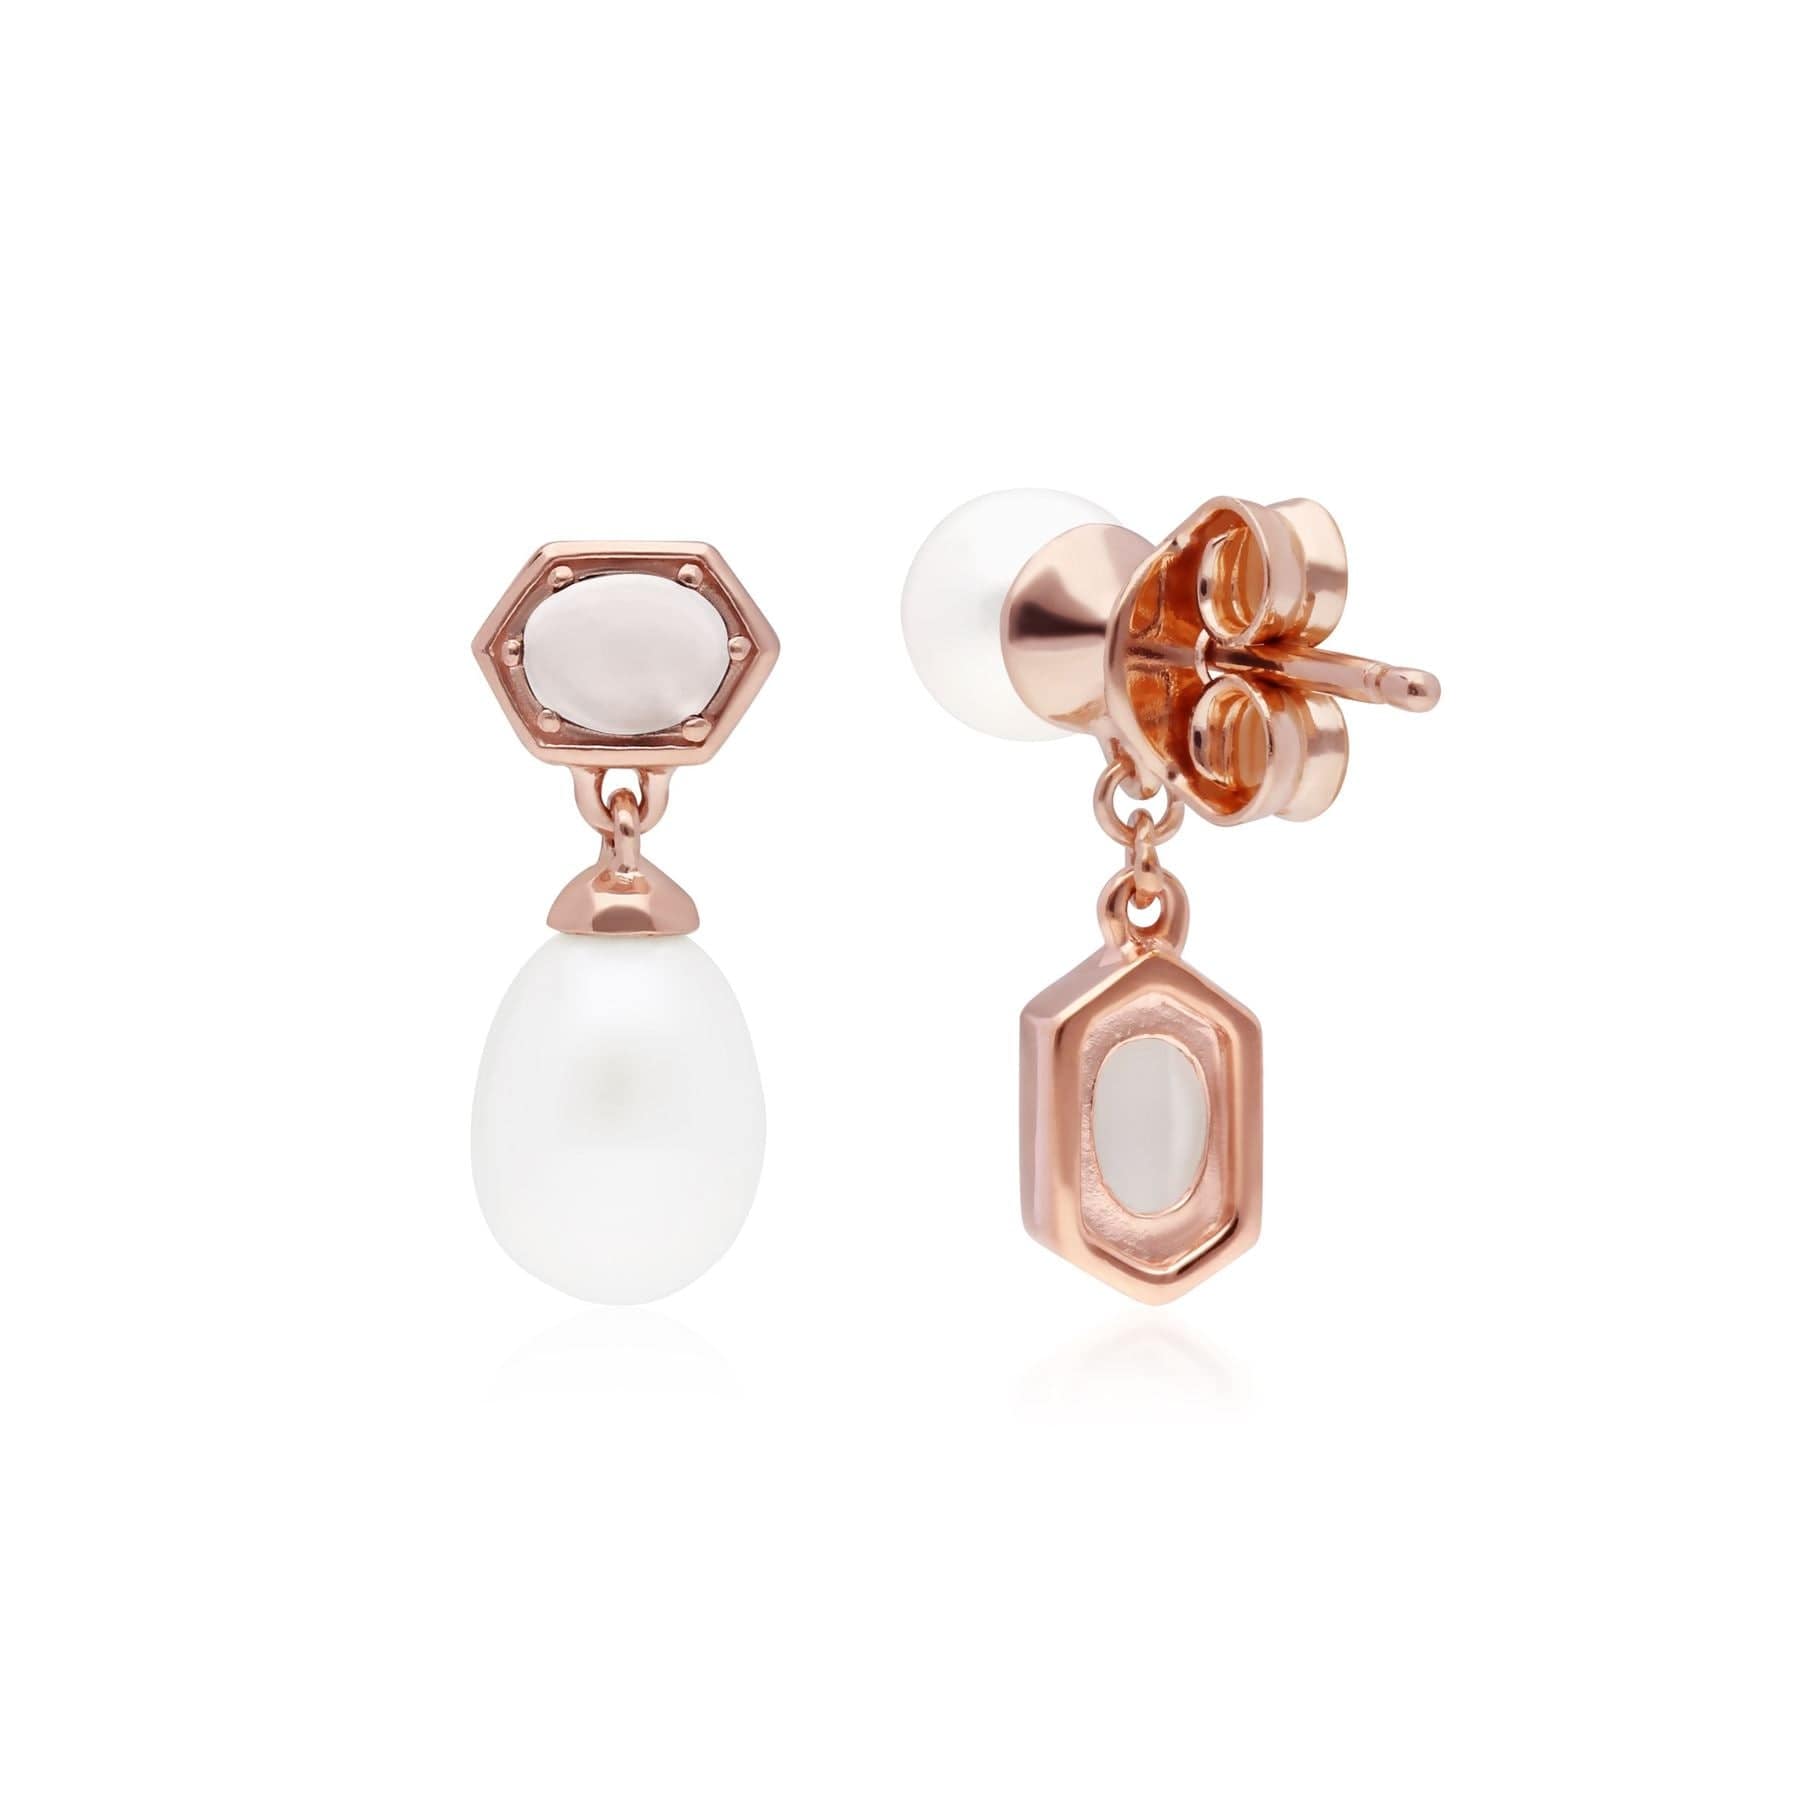 Modern Pearl & Moonstone Mismatched Drop Earrings in Rose Gold Plated Silver - Gemondo